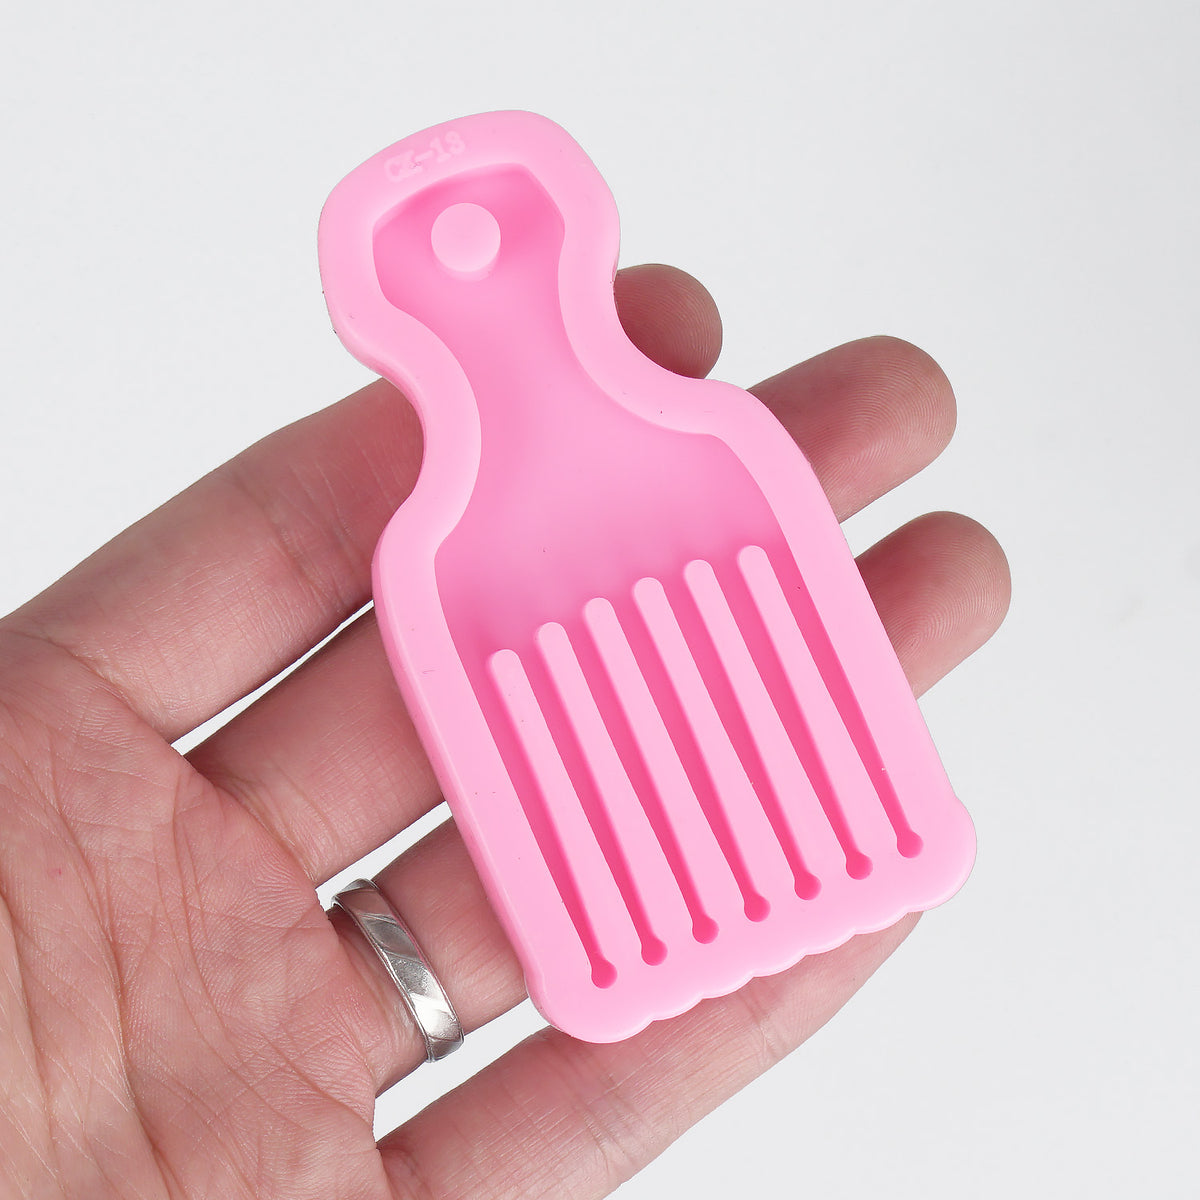 Mirror Cat Hair comb Comb Silicone resin mold,kawaii style Making Hair  accessories Mold,Polymer Clay